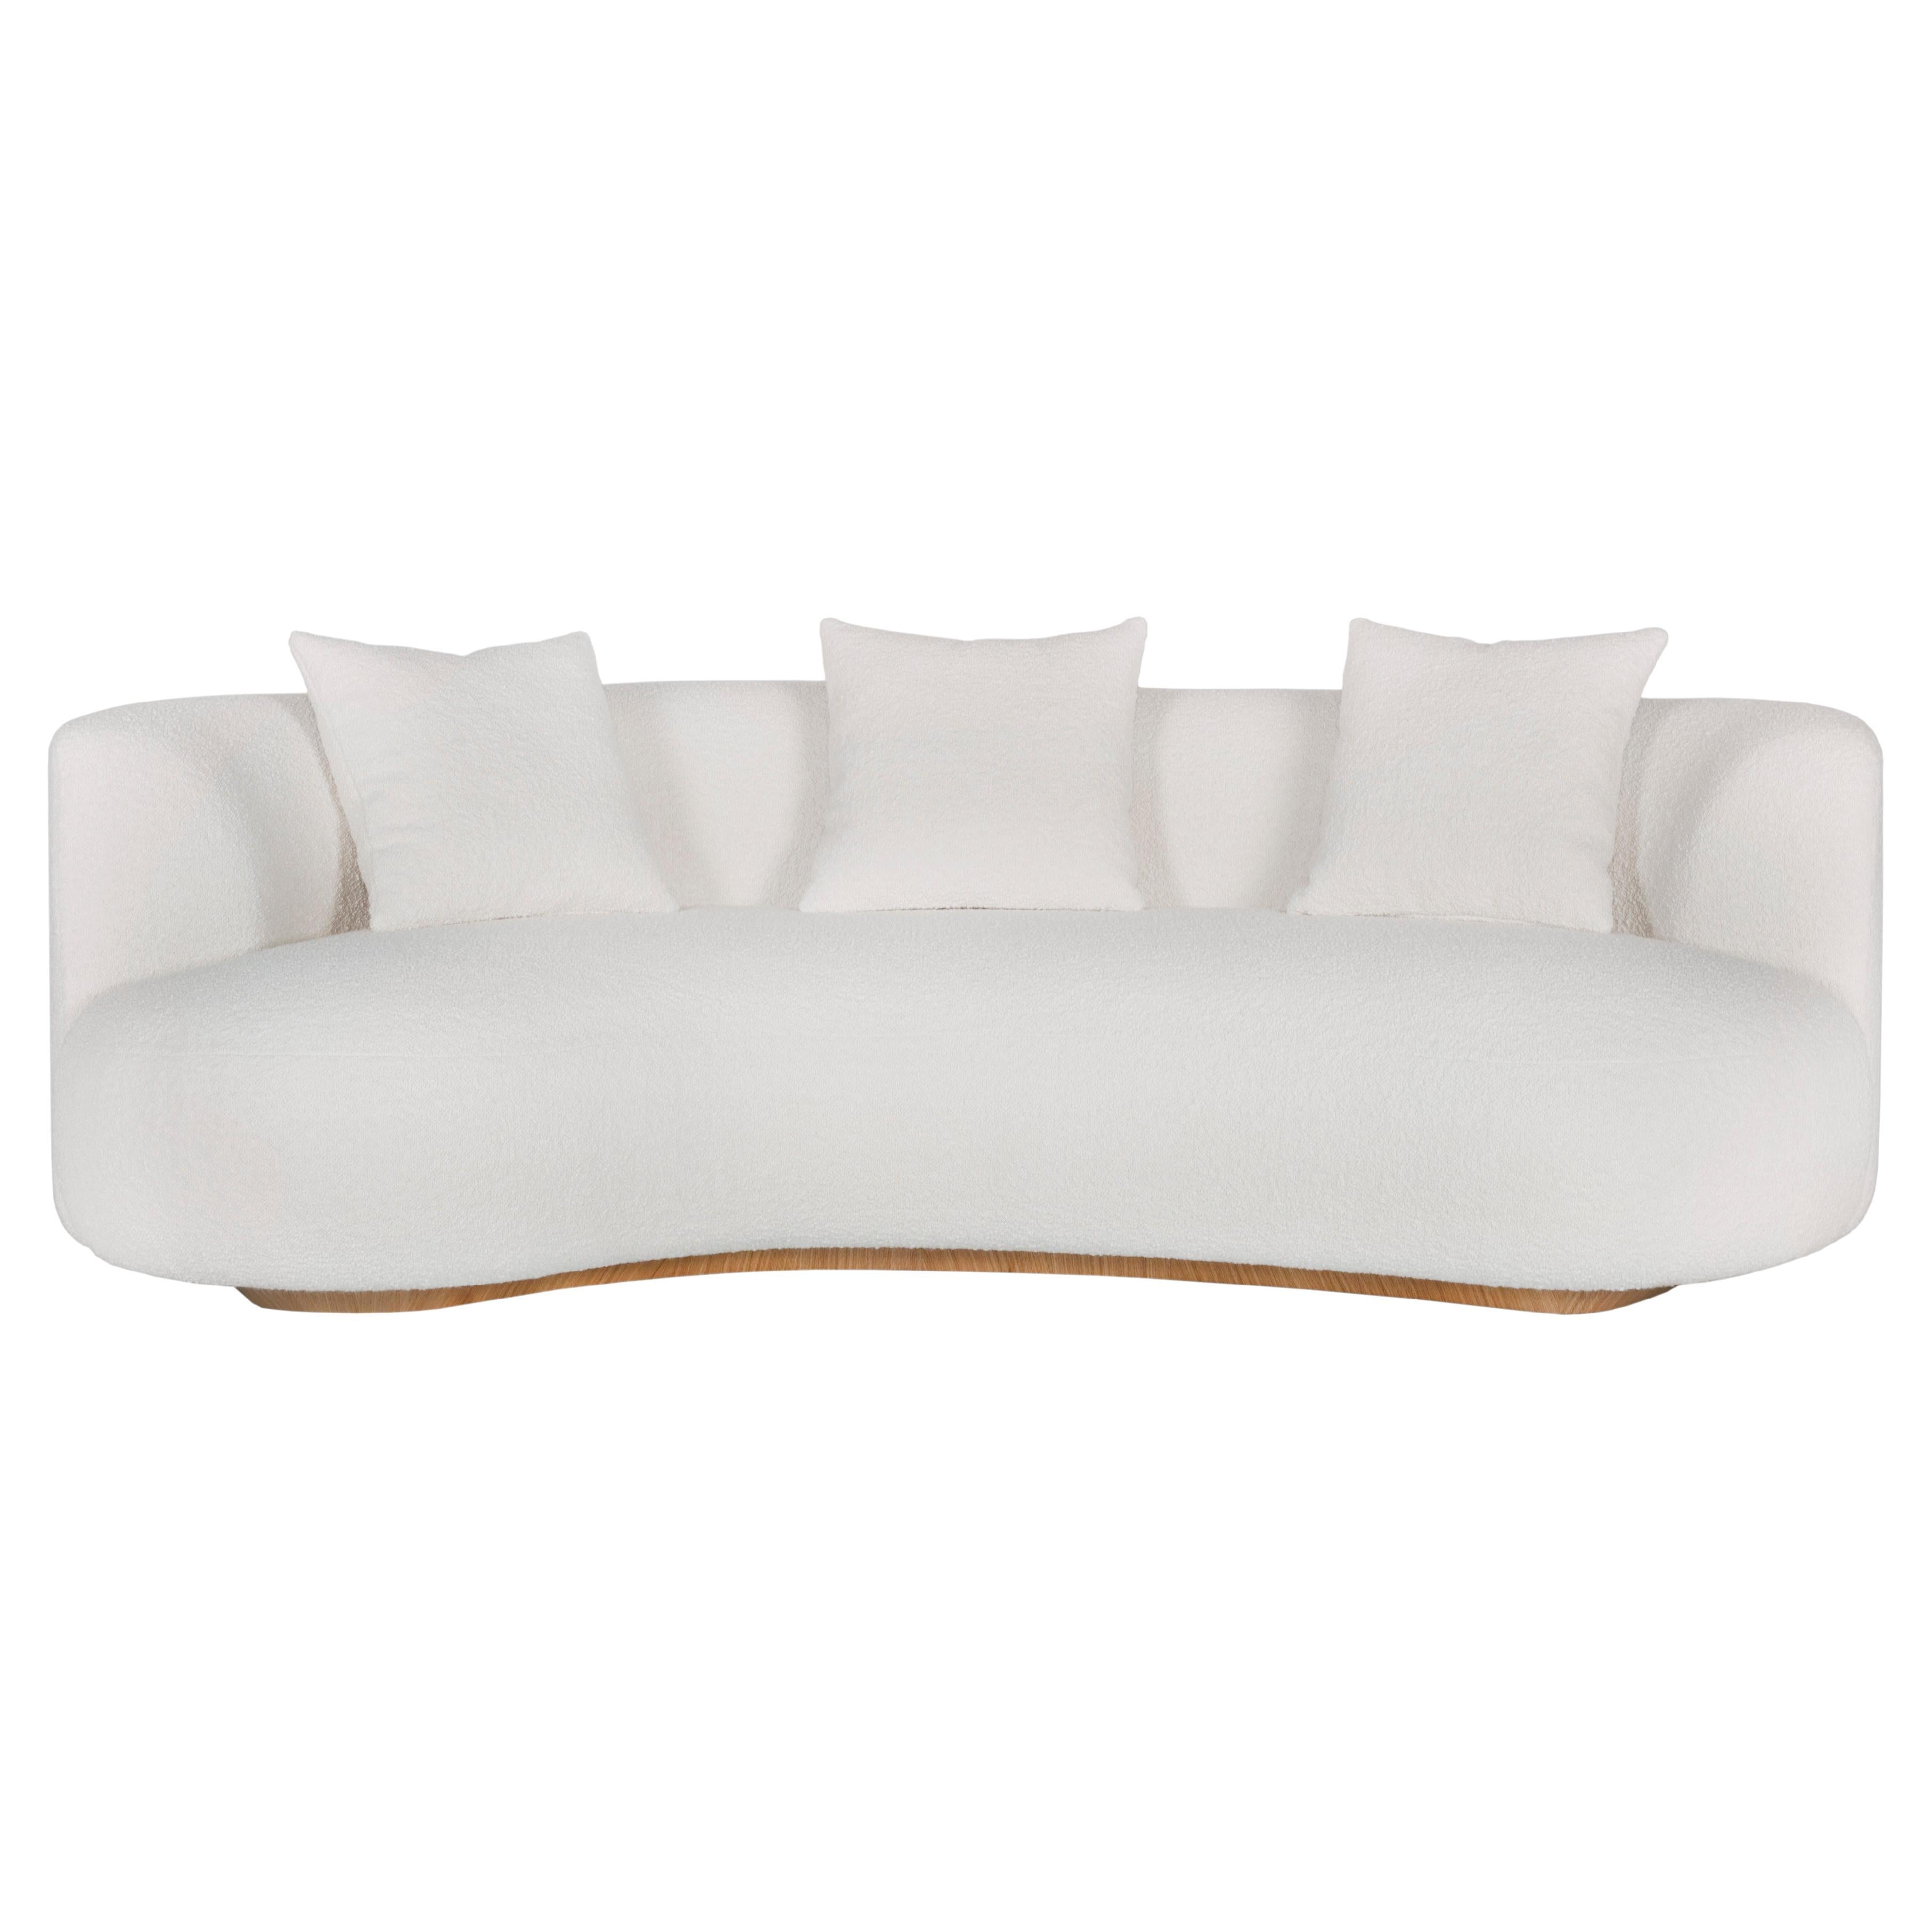 Twins Sofa, Contemporary Collection, Handcrafted in Portugal - Europe by Greenapple.

Designed by Rute Martins for the Contemporary Collection, the Twins curved sofa and day bed share the same genes, yet each possesses a distinct design, creating a